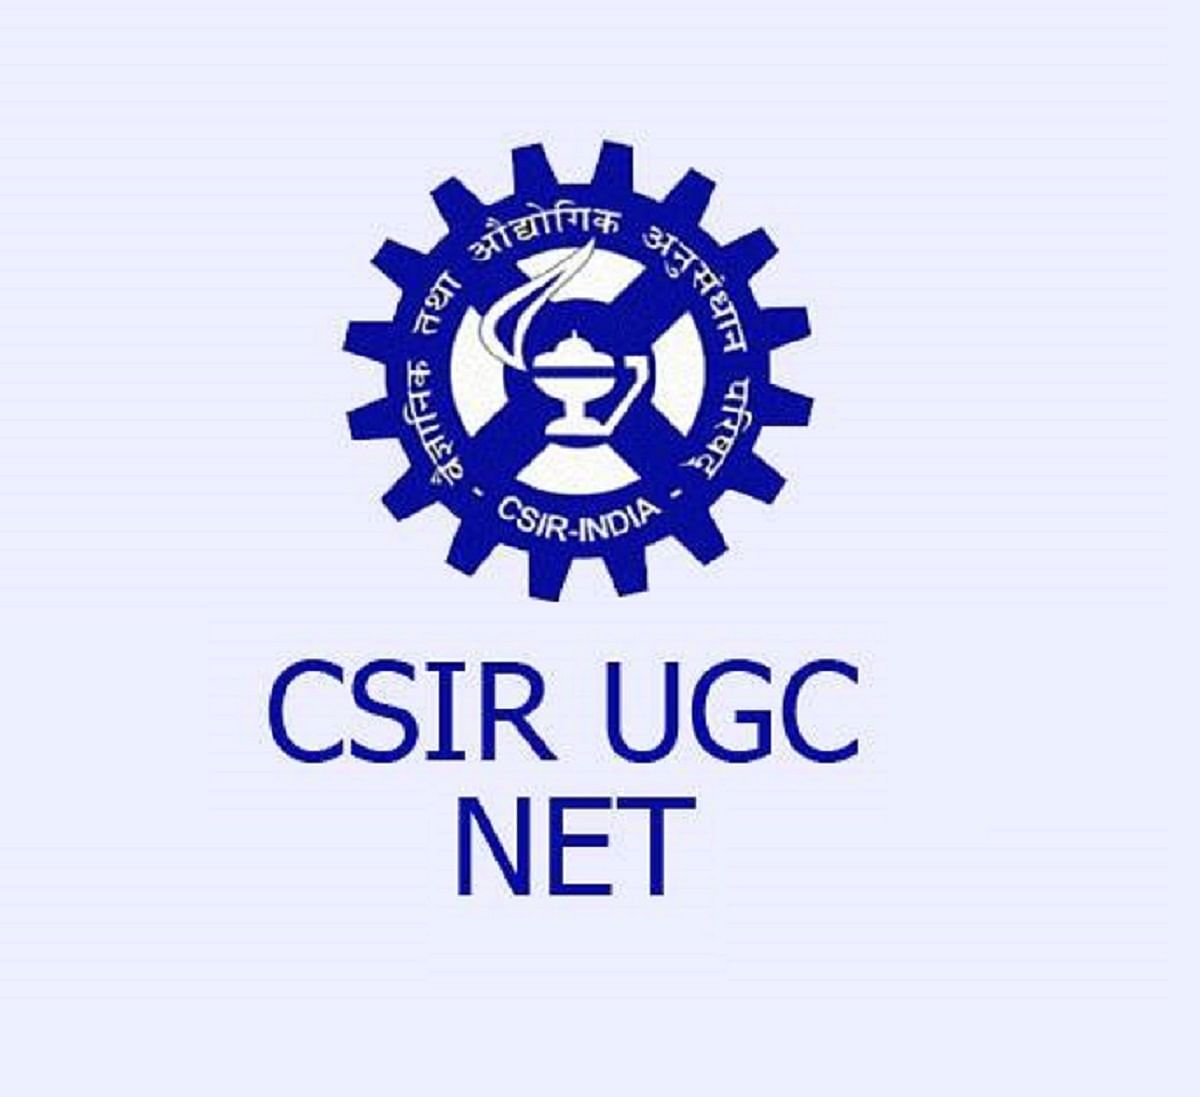 CSIR NET Admit Card 2022 Released on Official Website, Direct Link to Download Here